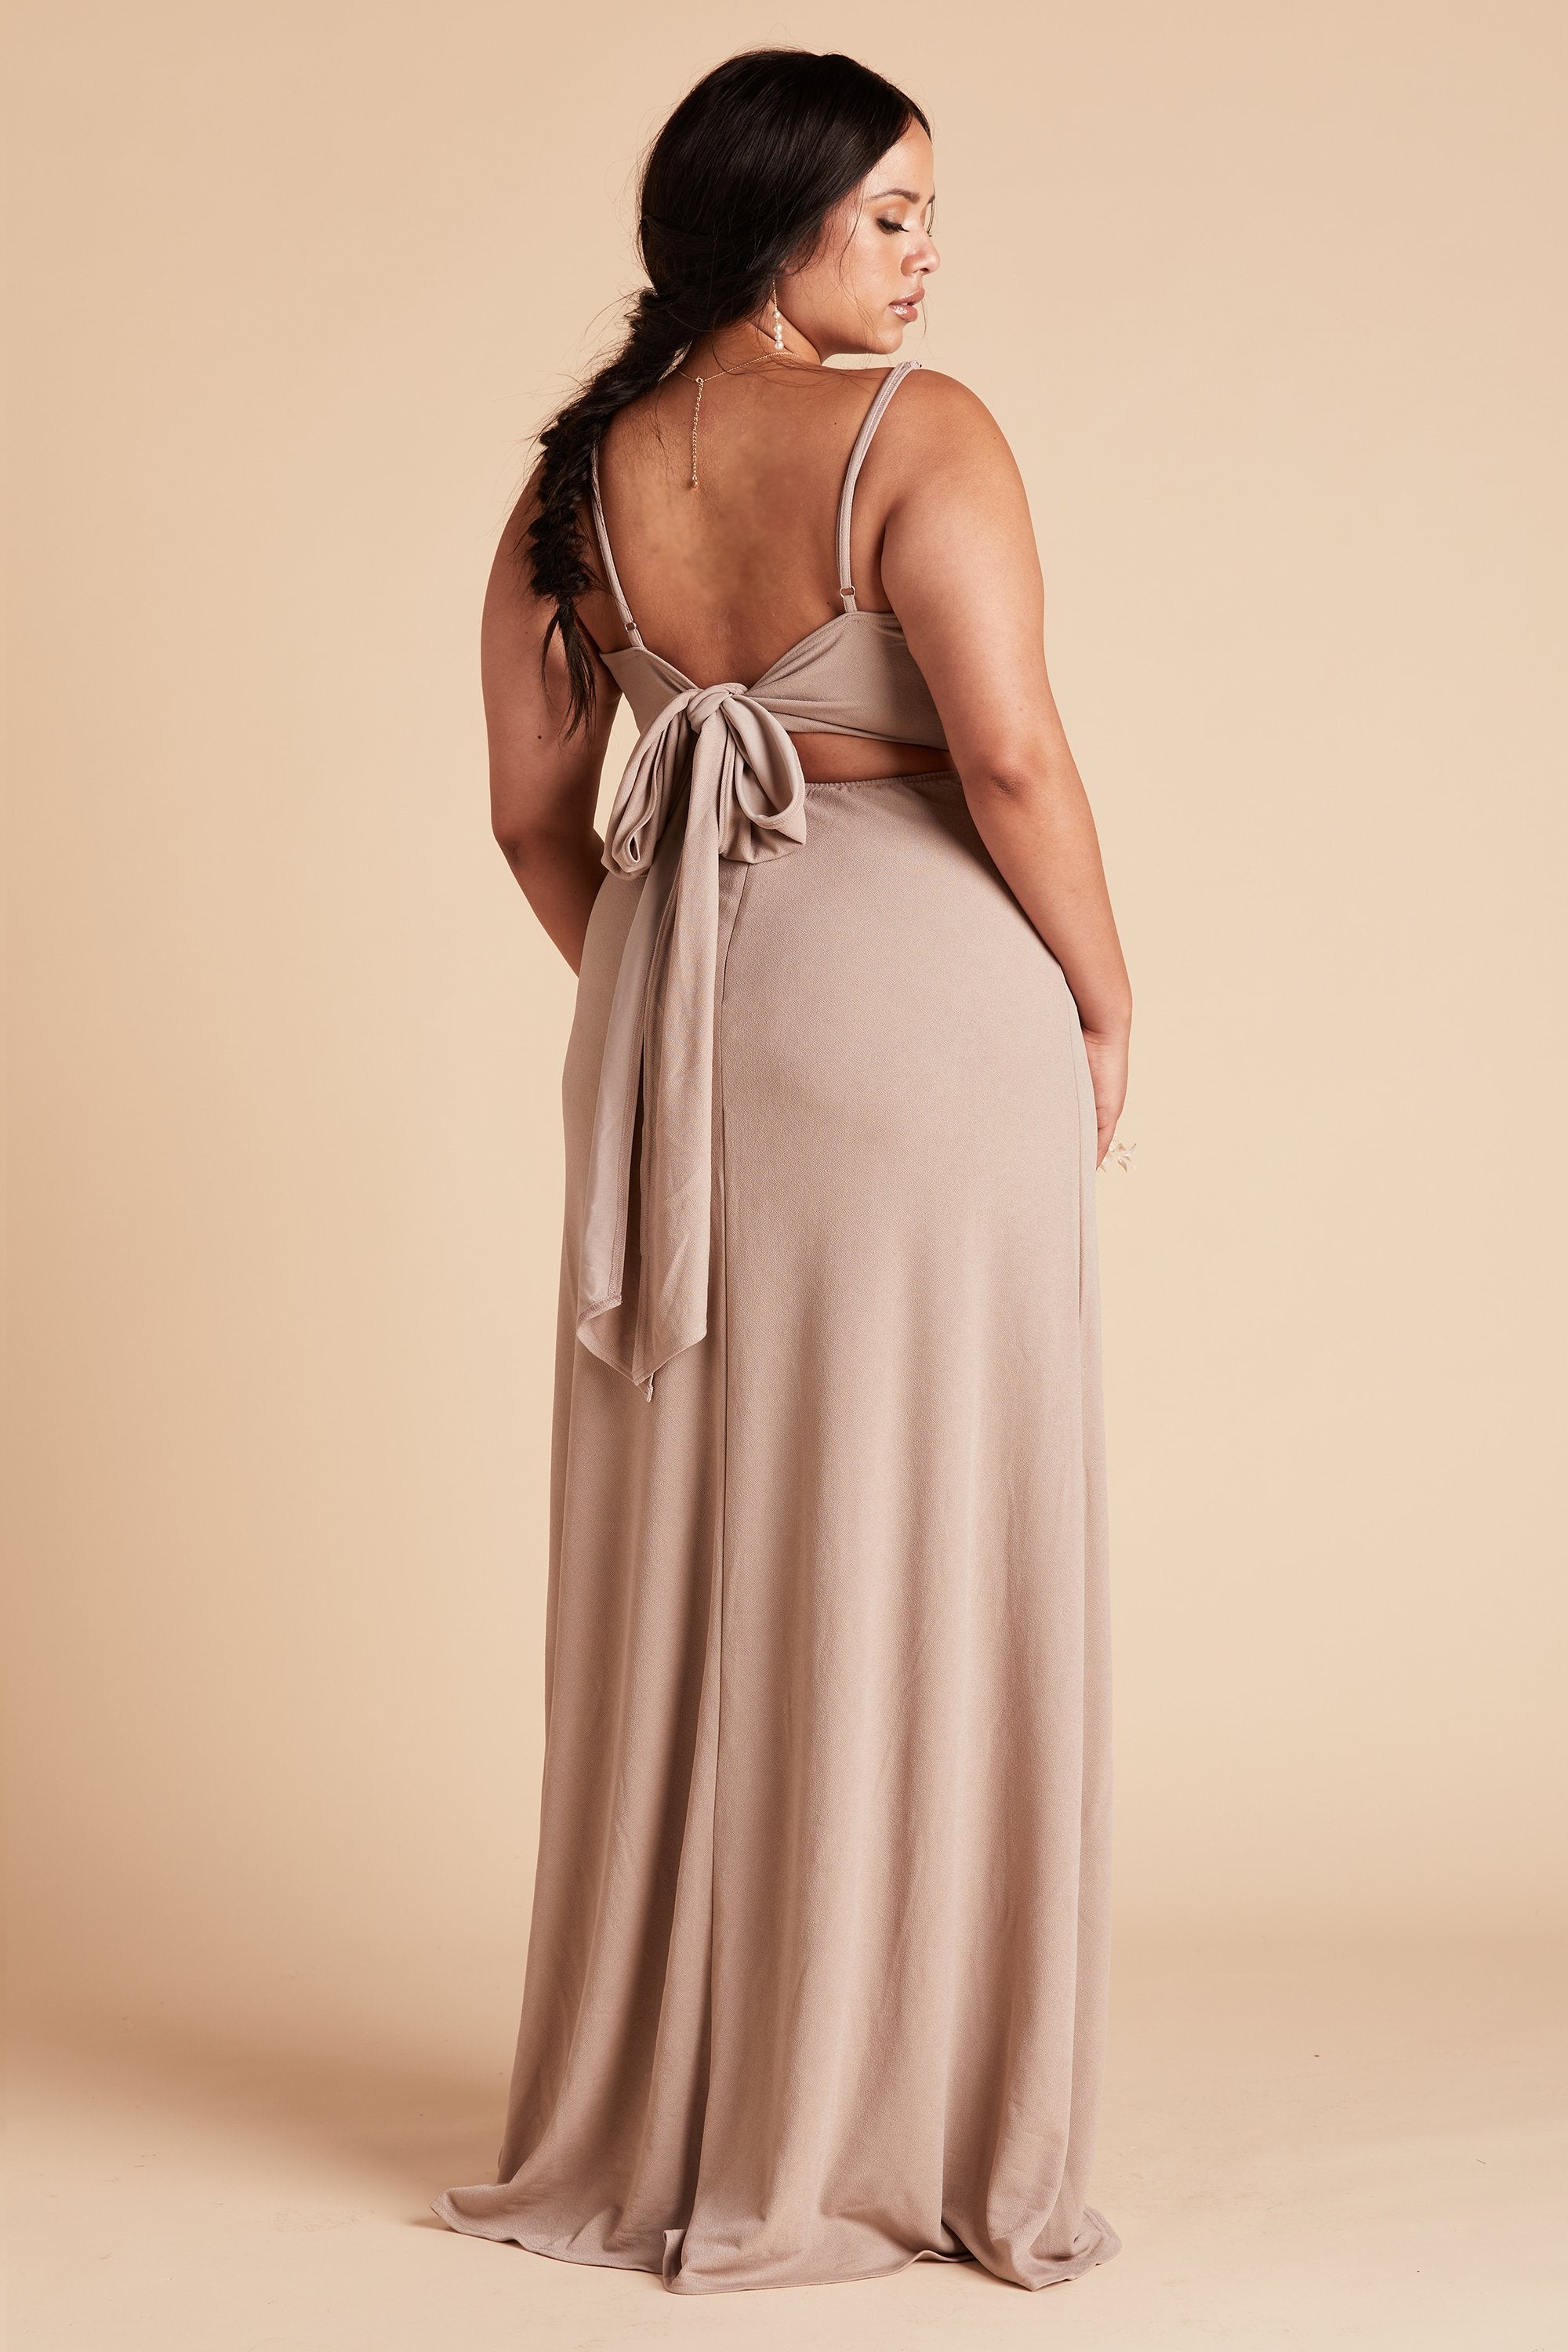 Benny plus size bridesmaid dress in taupe crepe by Birdy Grey, back view